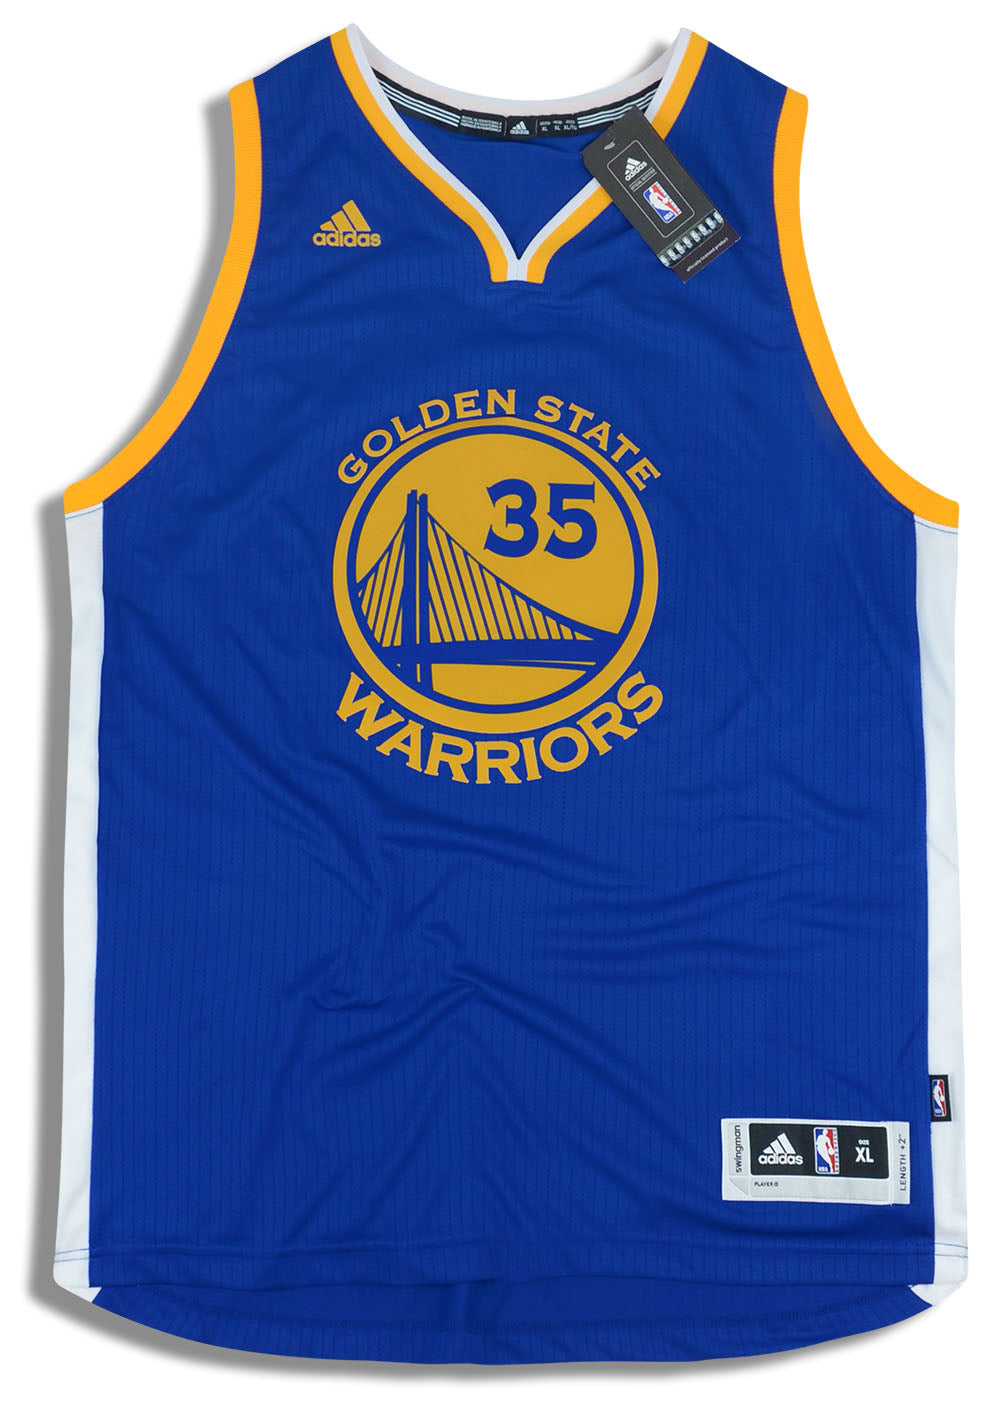 KEVIN DURANT Adidas WARRIORS 2017 West ALL STAR GAME Swingman